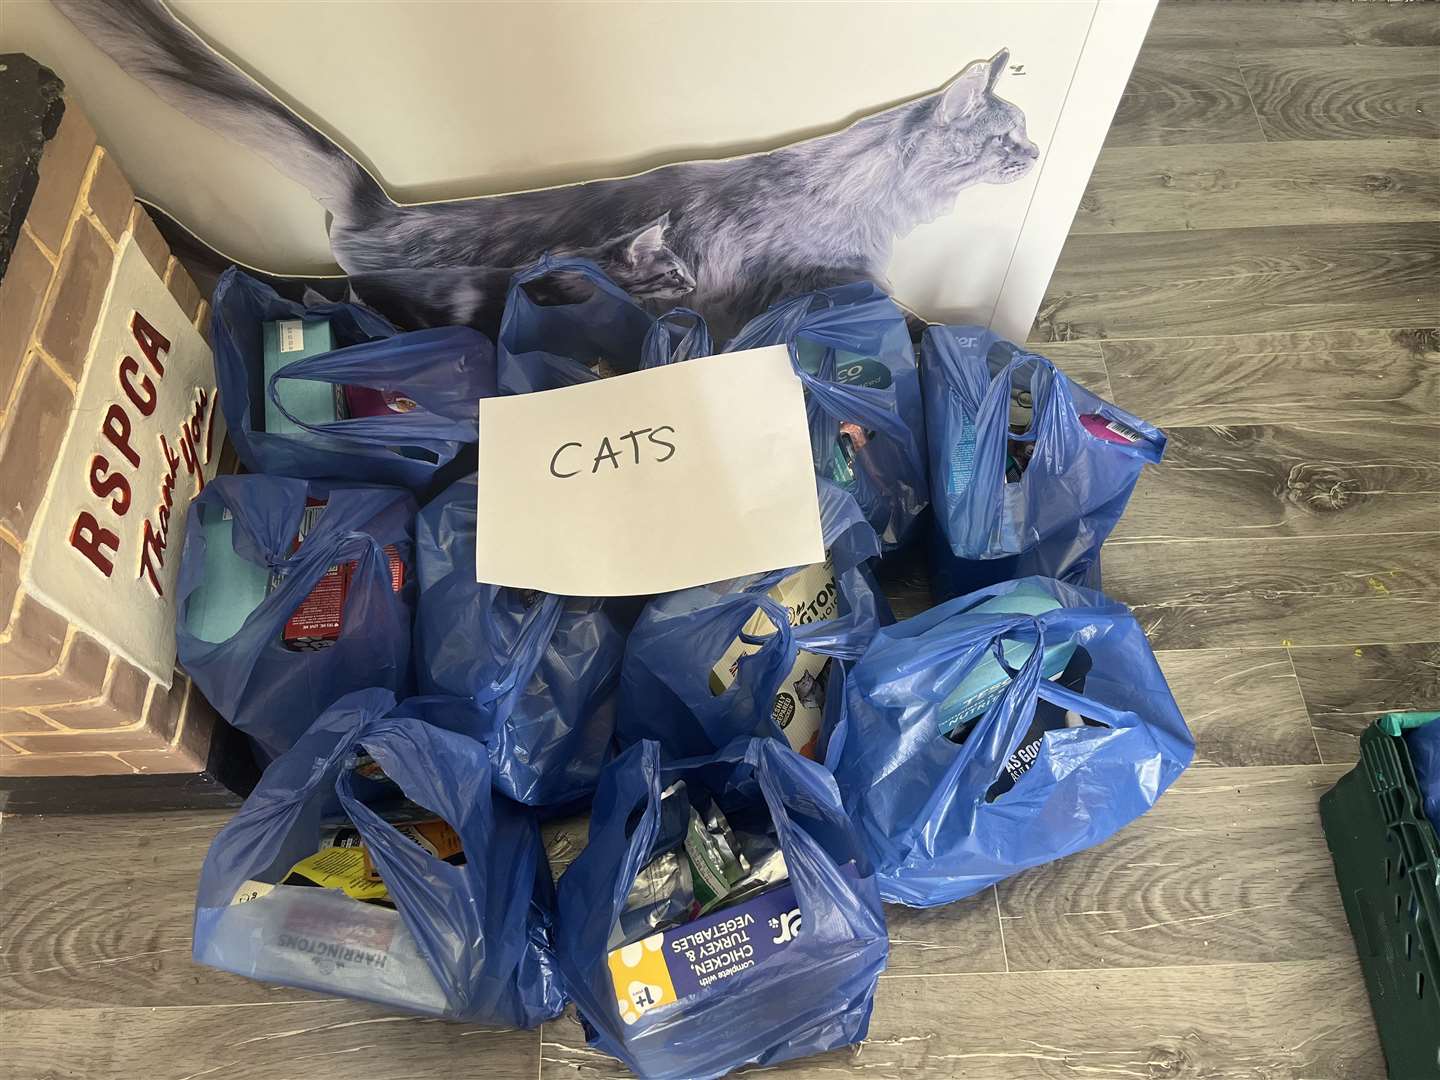 The team at Ashford Garden Cattery have been busy making pet food parcels for cats and dogs